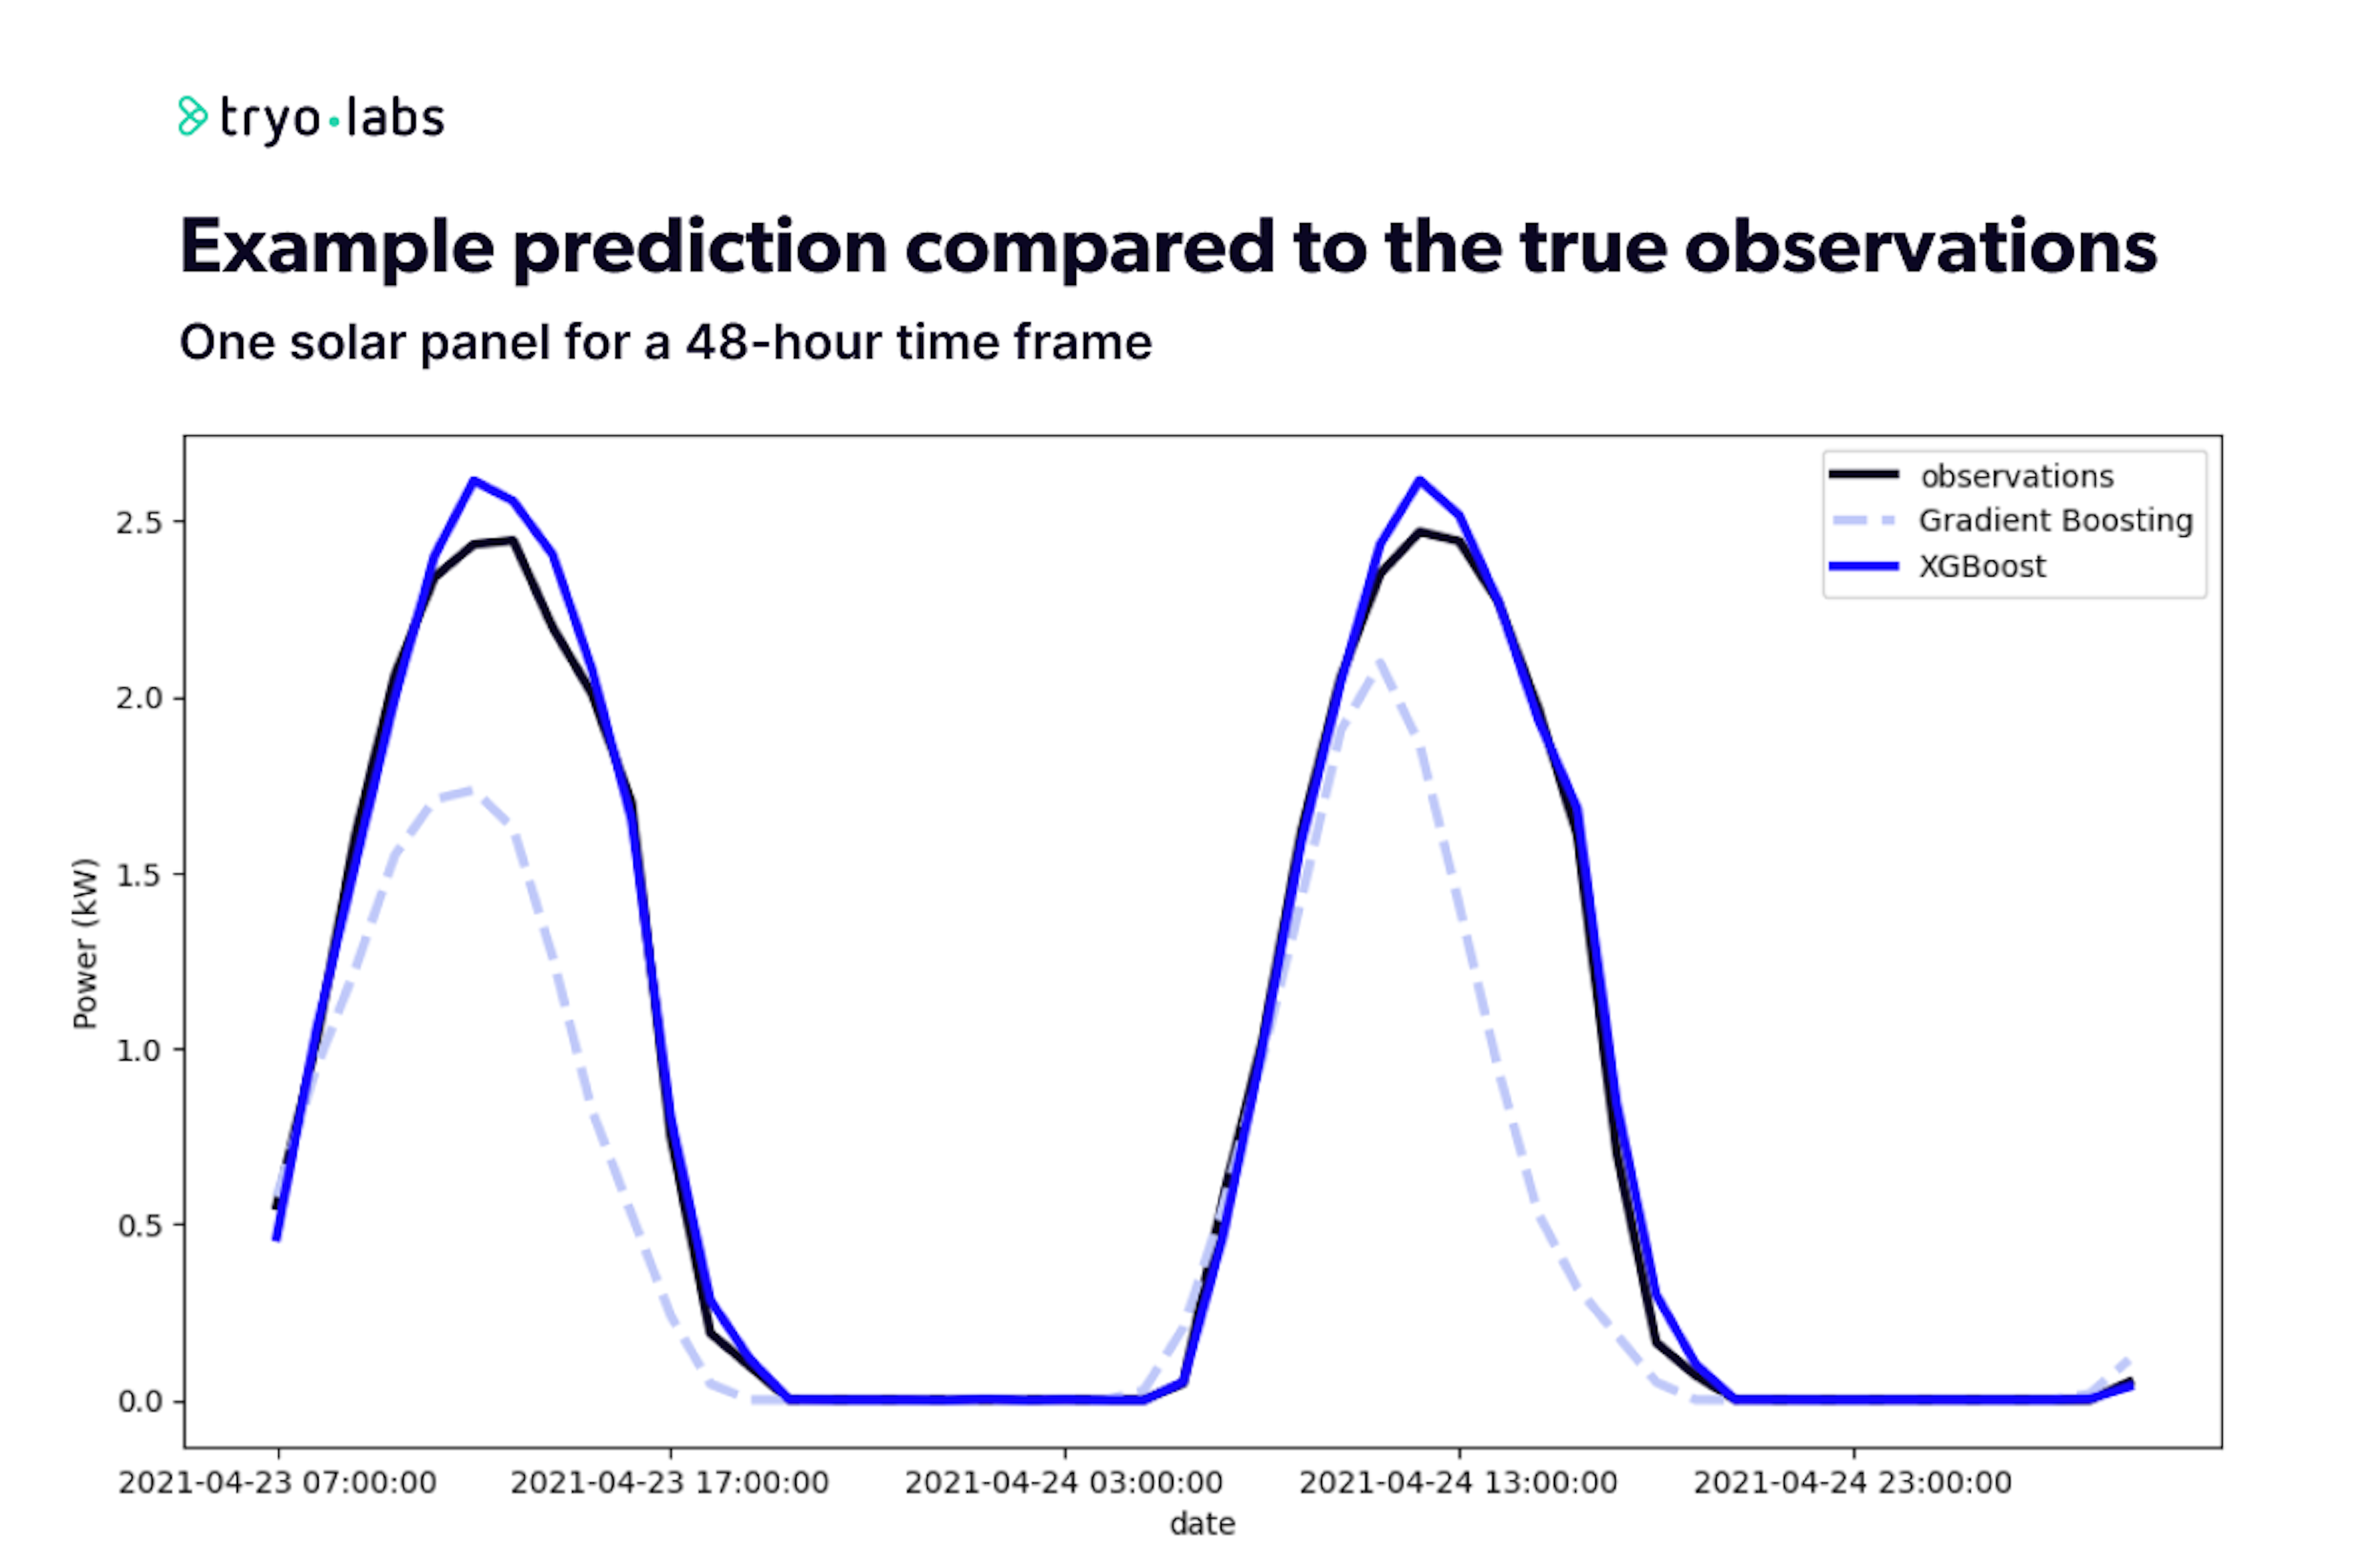 Graphic showing an example of a 48-hour time frame prediction for one solar panel compared to the actual observations